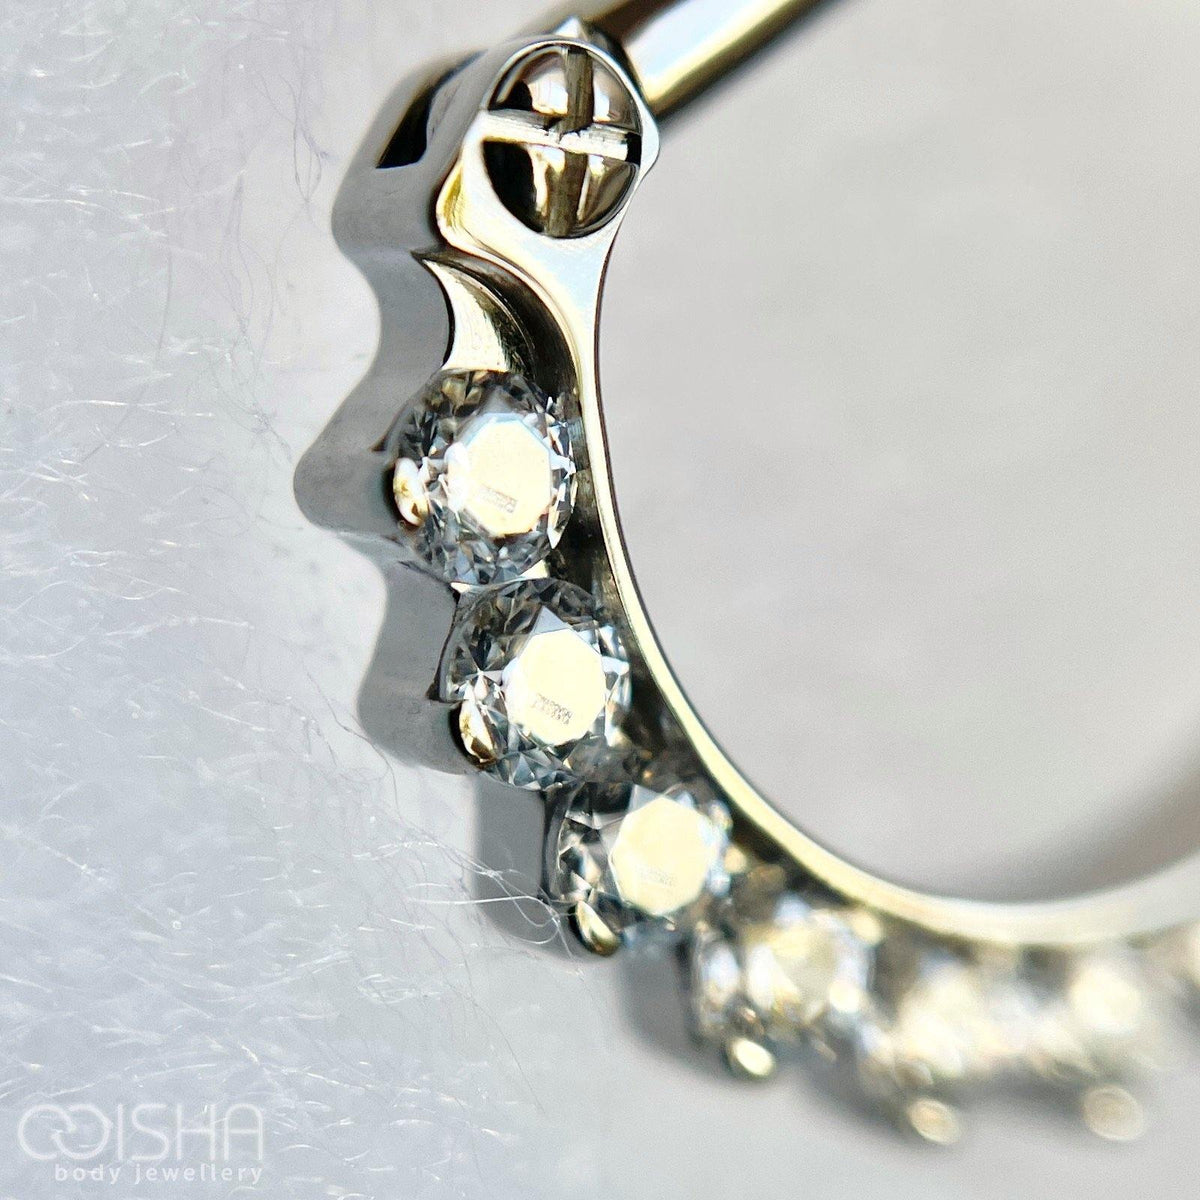 Industrial Strength Odyssey Prong Set Faceted Gem Clicker - Isha Body Jewellery